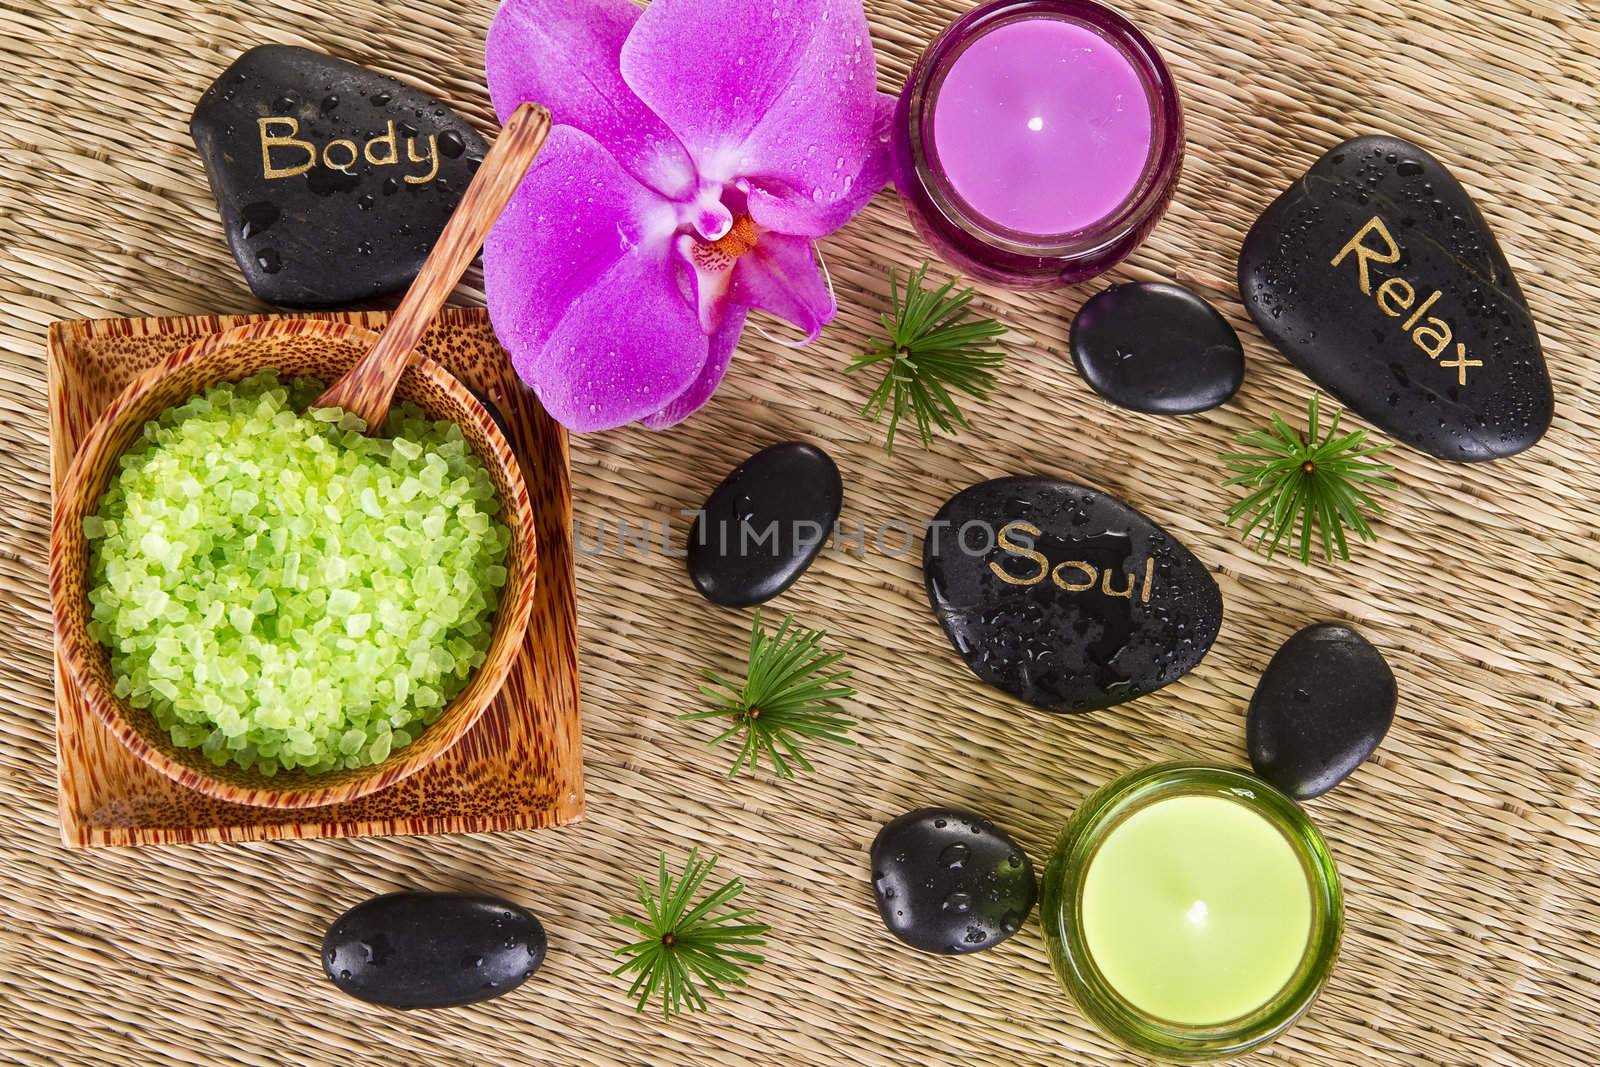 Relax Body Soul Spa Concept - Zen Stones With Pink Orchid and Relaxing Salt